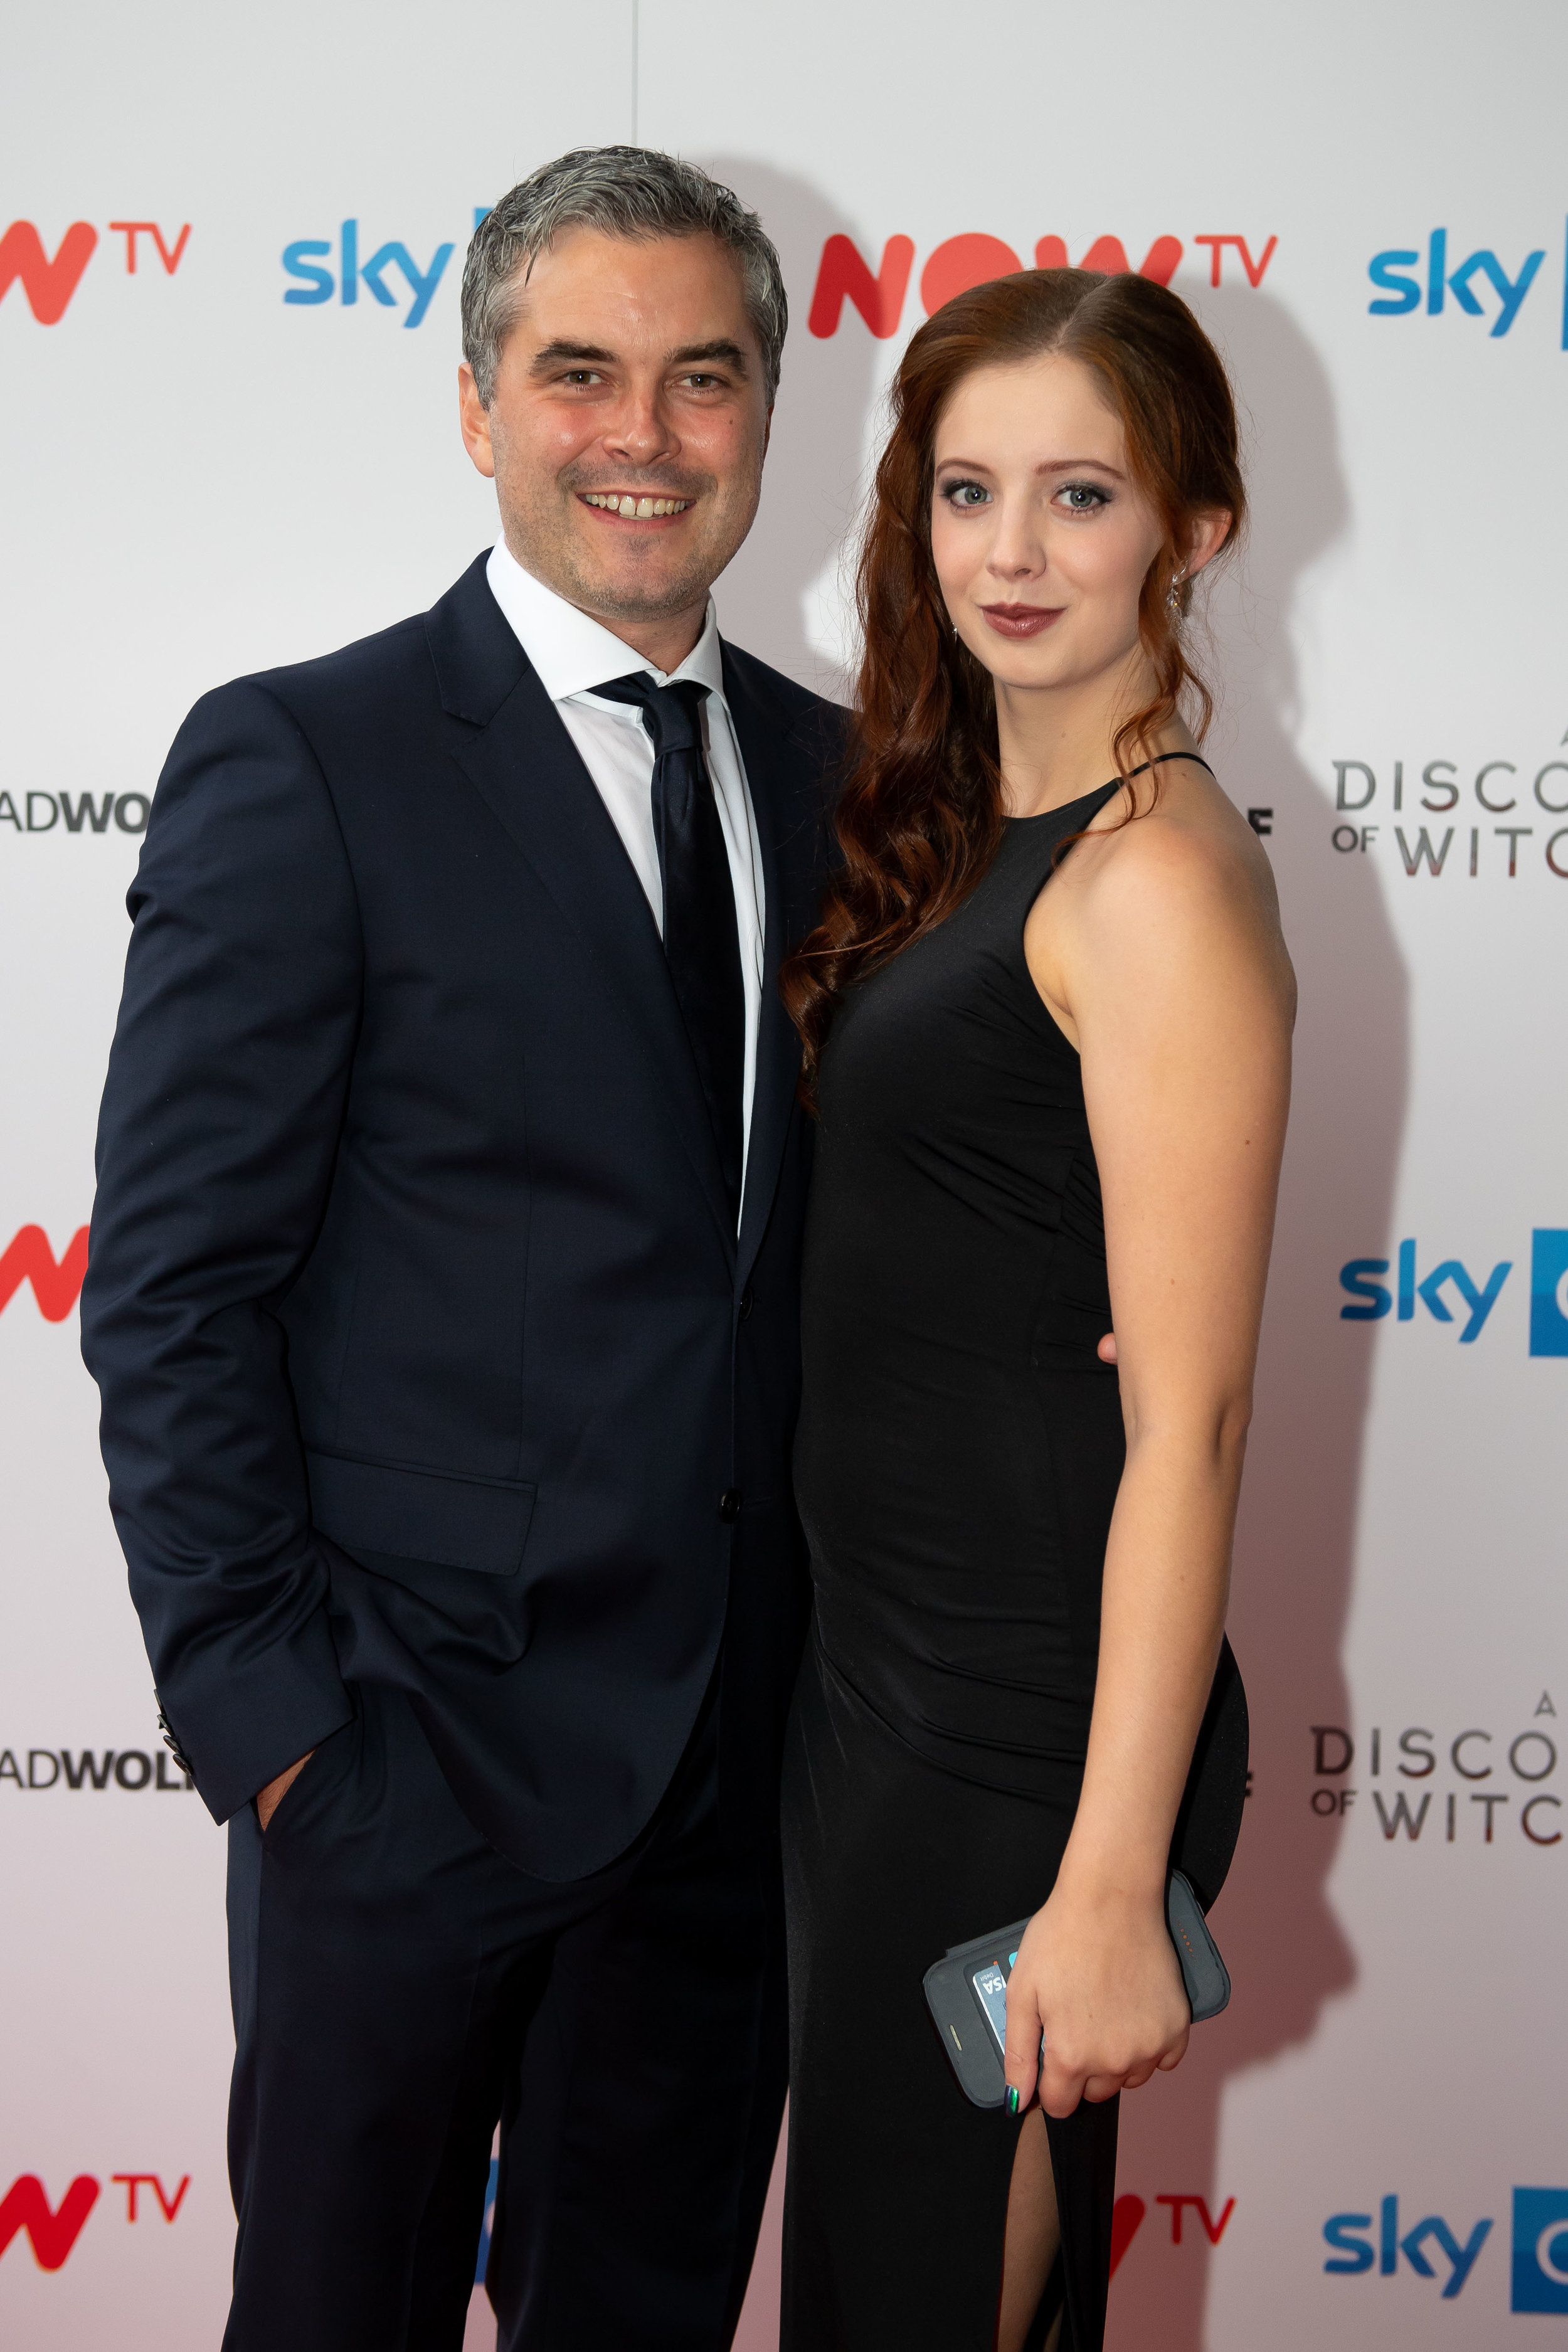  CARDIFF, WALES - SEPTEMBER 05: Trystan Gravelle and Sarah Louise Madison attend the UK Premiere of 'A Discovery Of Witches' at Cineworld on September 5, 2018 in Cardiff, Wales. (Photo by Matthew Horwood/Getty Images) 